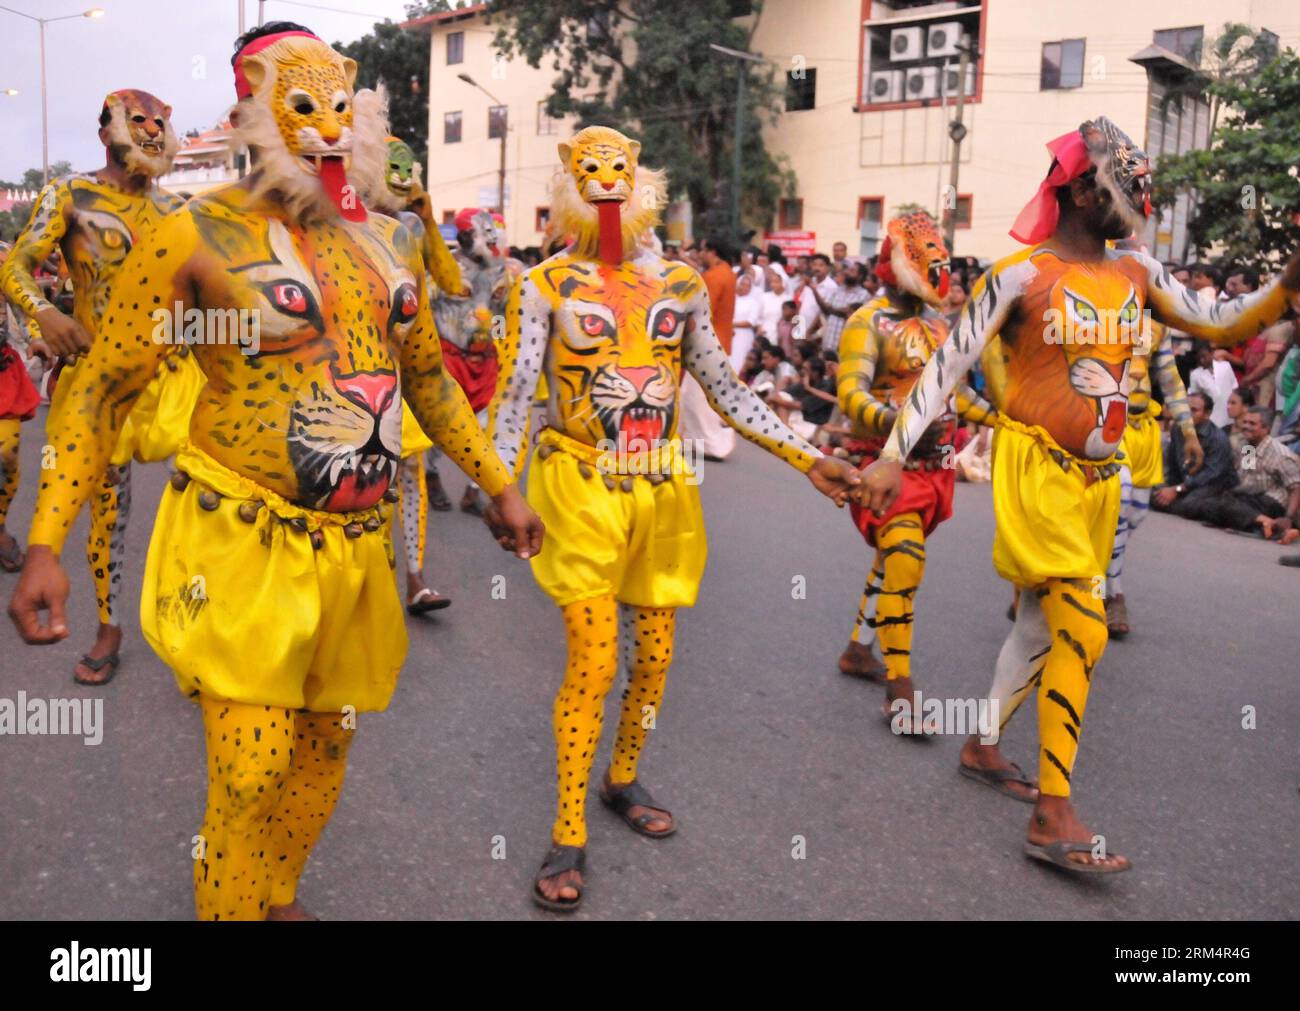 Bildnummer: 60507332  Datum: 20.09.2013  Copyright: imago/Xinhua TRIVANDRUM, Sept. 20, 2013 - dance to celebrate the biggest harvest festival Onam Festival in Trivandrum, Kerala, India, Sept. 20, 2013. Onam is ten days of fun and feasting as Kerala celebrates it with traditional fervor. Every home gets ready to welcome King Mahabali with floral carpets and elaborate feasts. Onam is also the harvest festival in Kerala. And the procession on the last day of Onam is the grandest one. There are as many as 3000 artists, 75 floats and 68 art forms which offer a colorful luster to the pageantry. (Xin Stock Photo